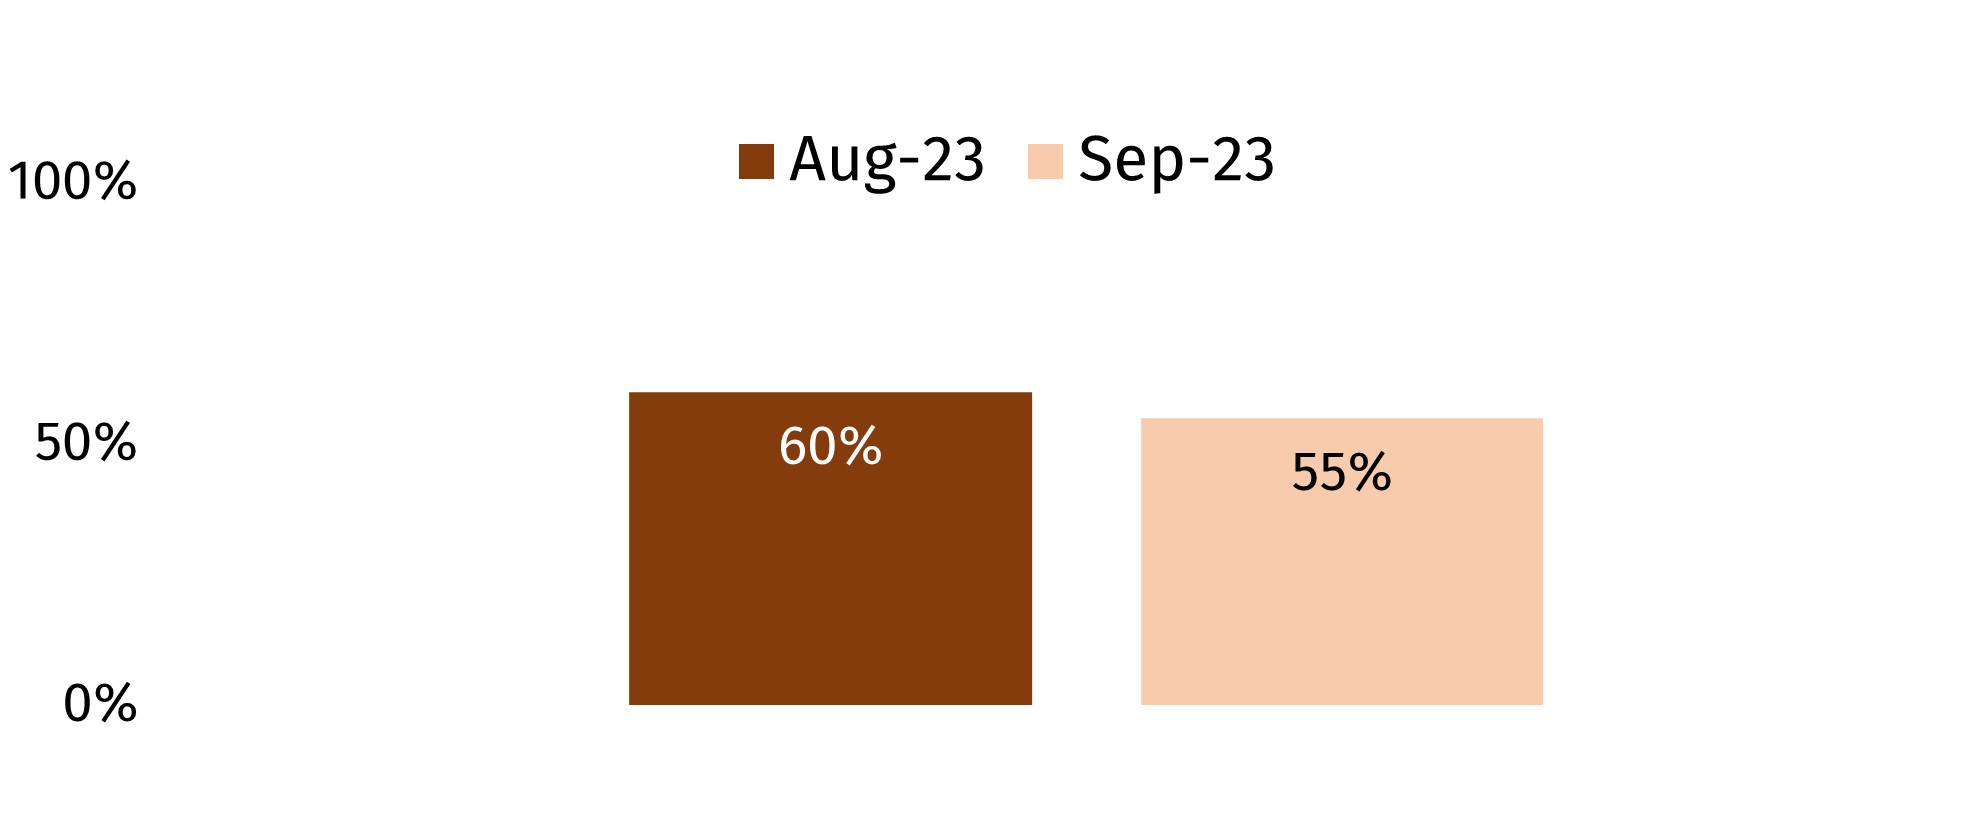 60% in August 2023 and 55% in September. 